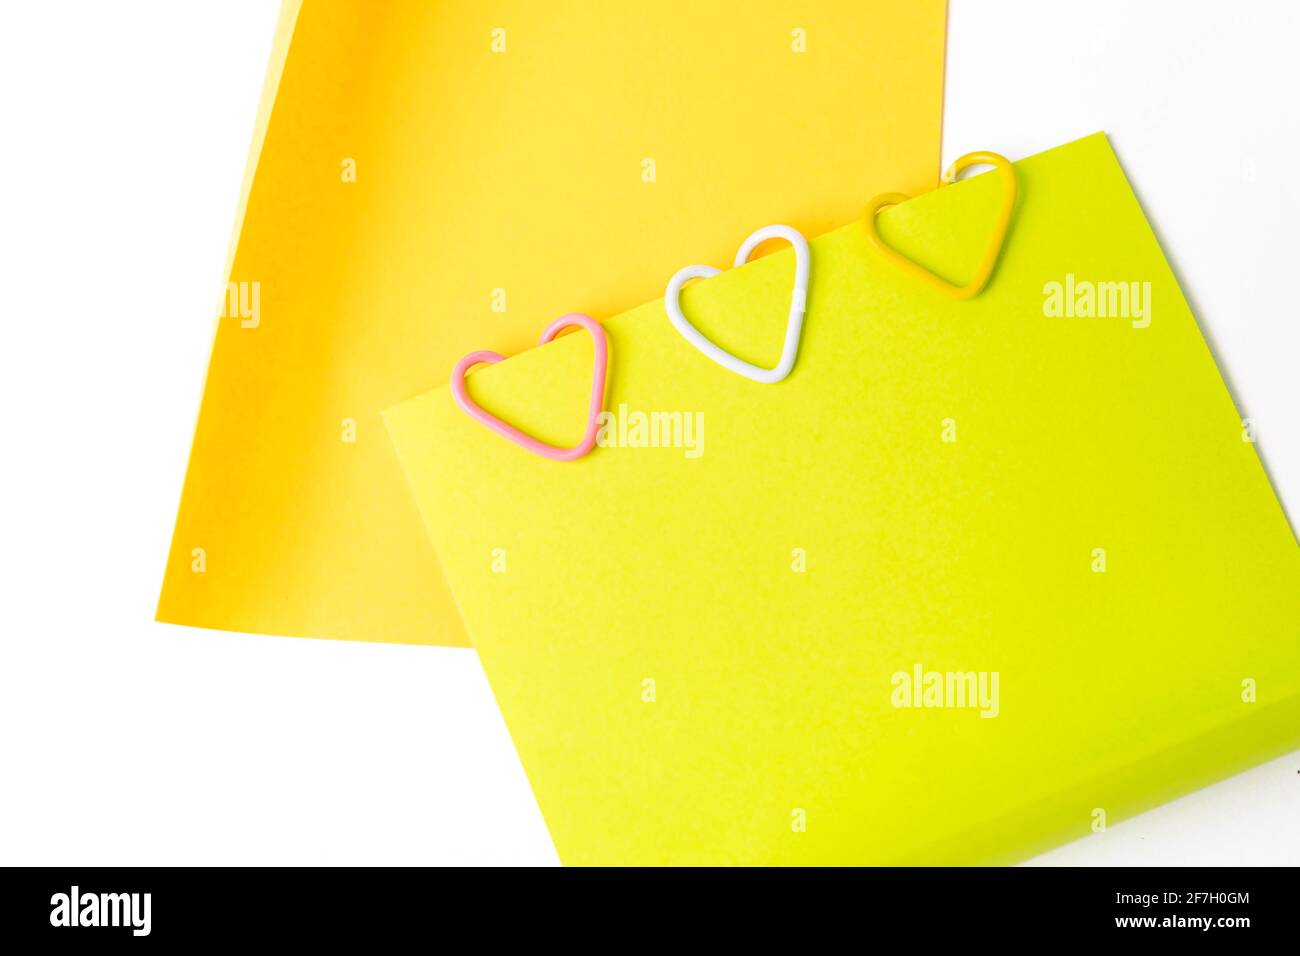 Heart shaped sticky notes on the background Stock Photo by ©Elnur_ 5561093